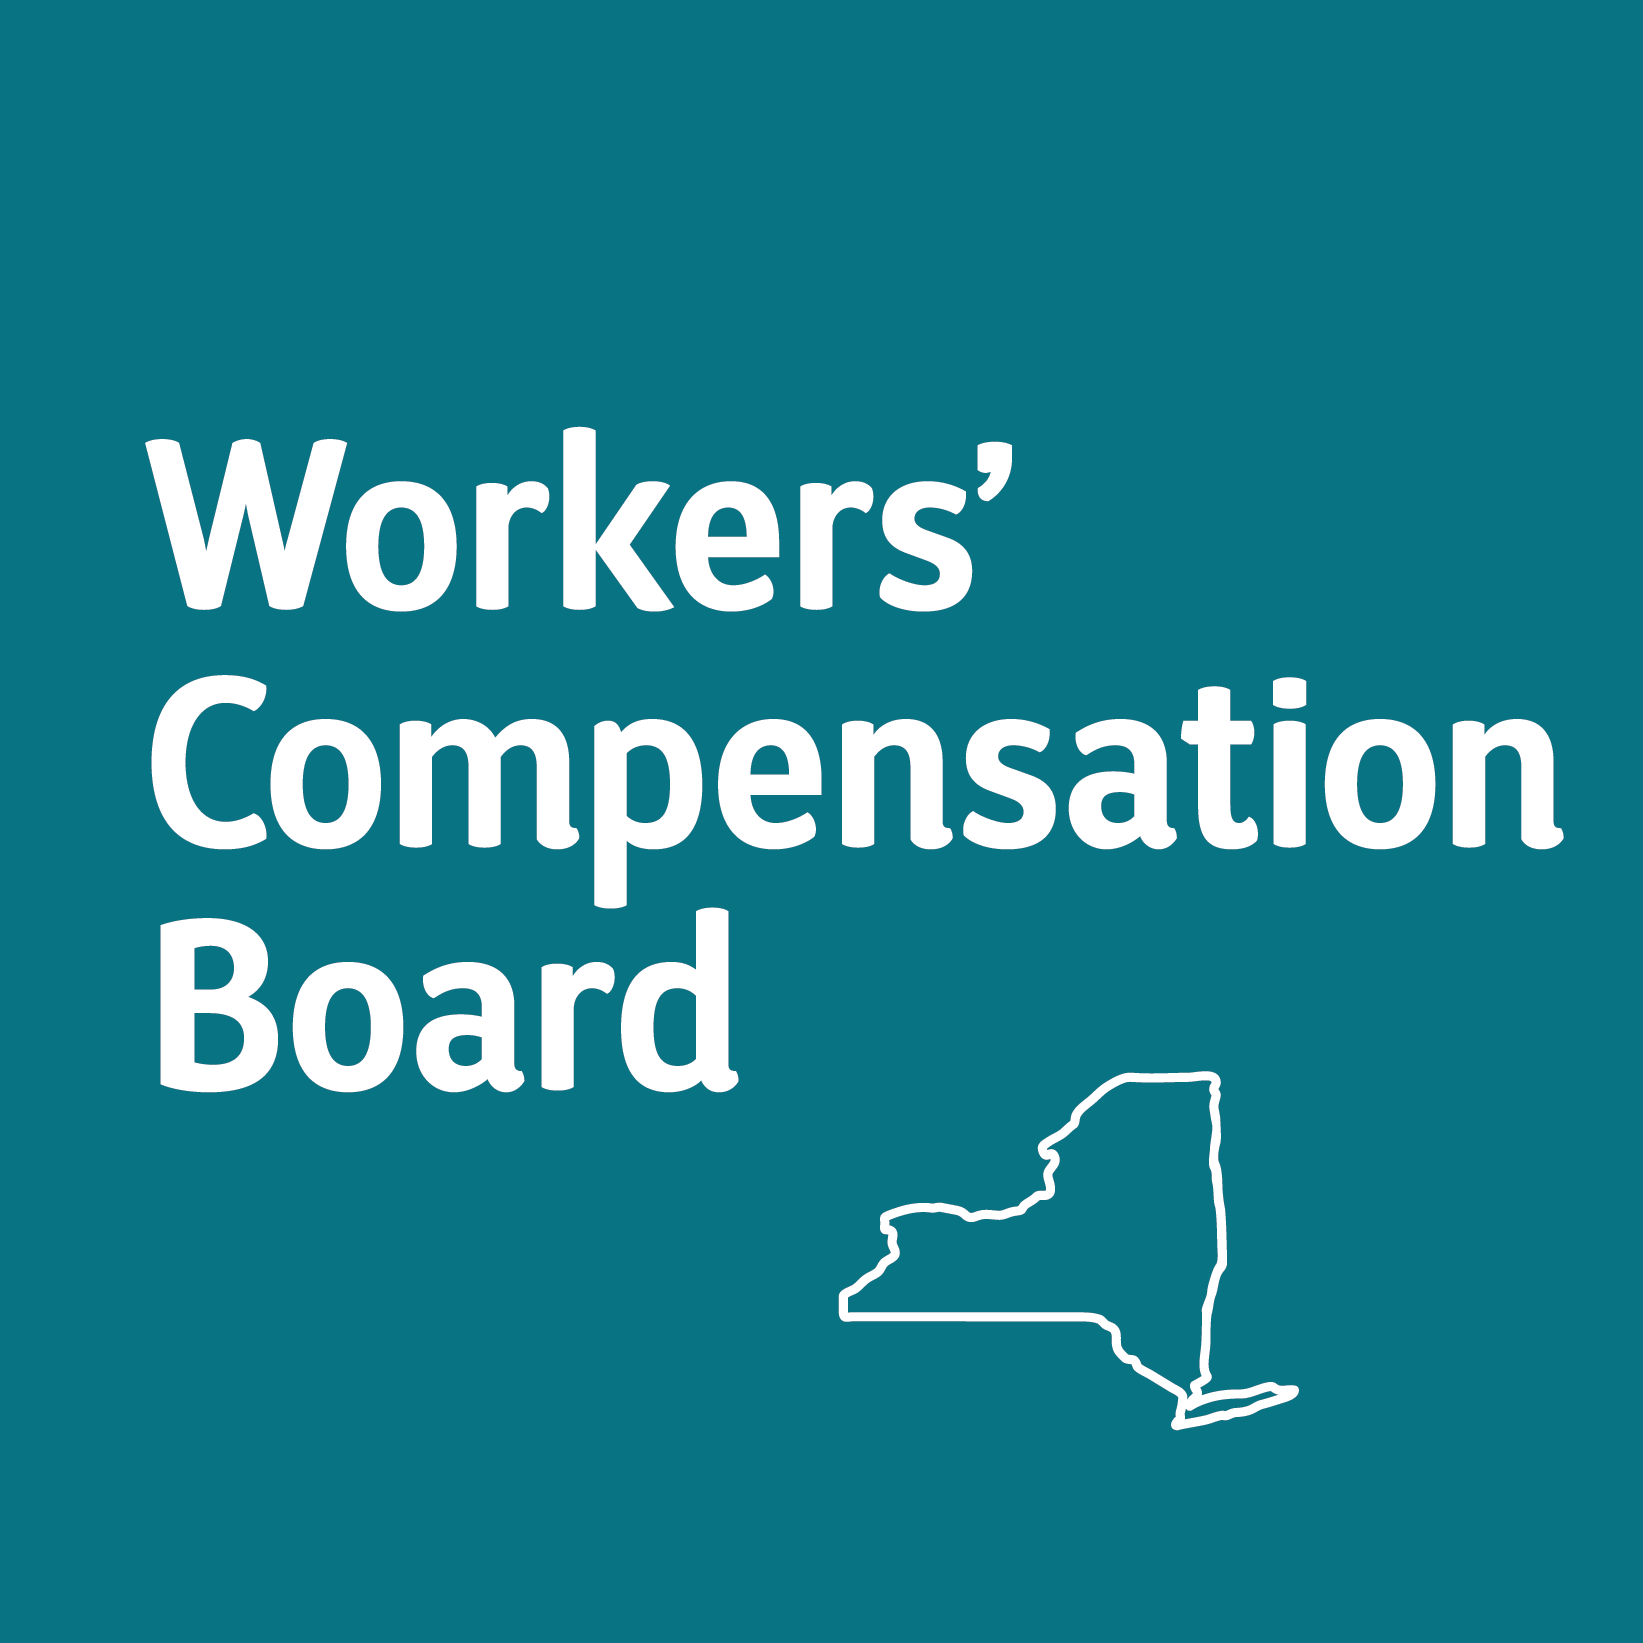 Workers' Compensation Board logo